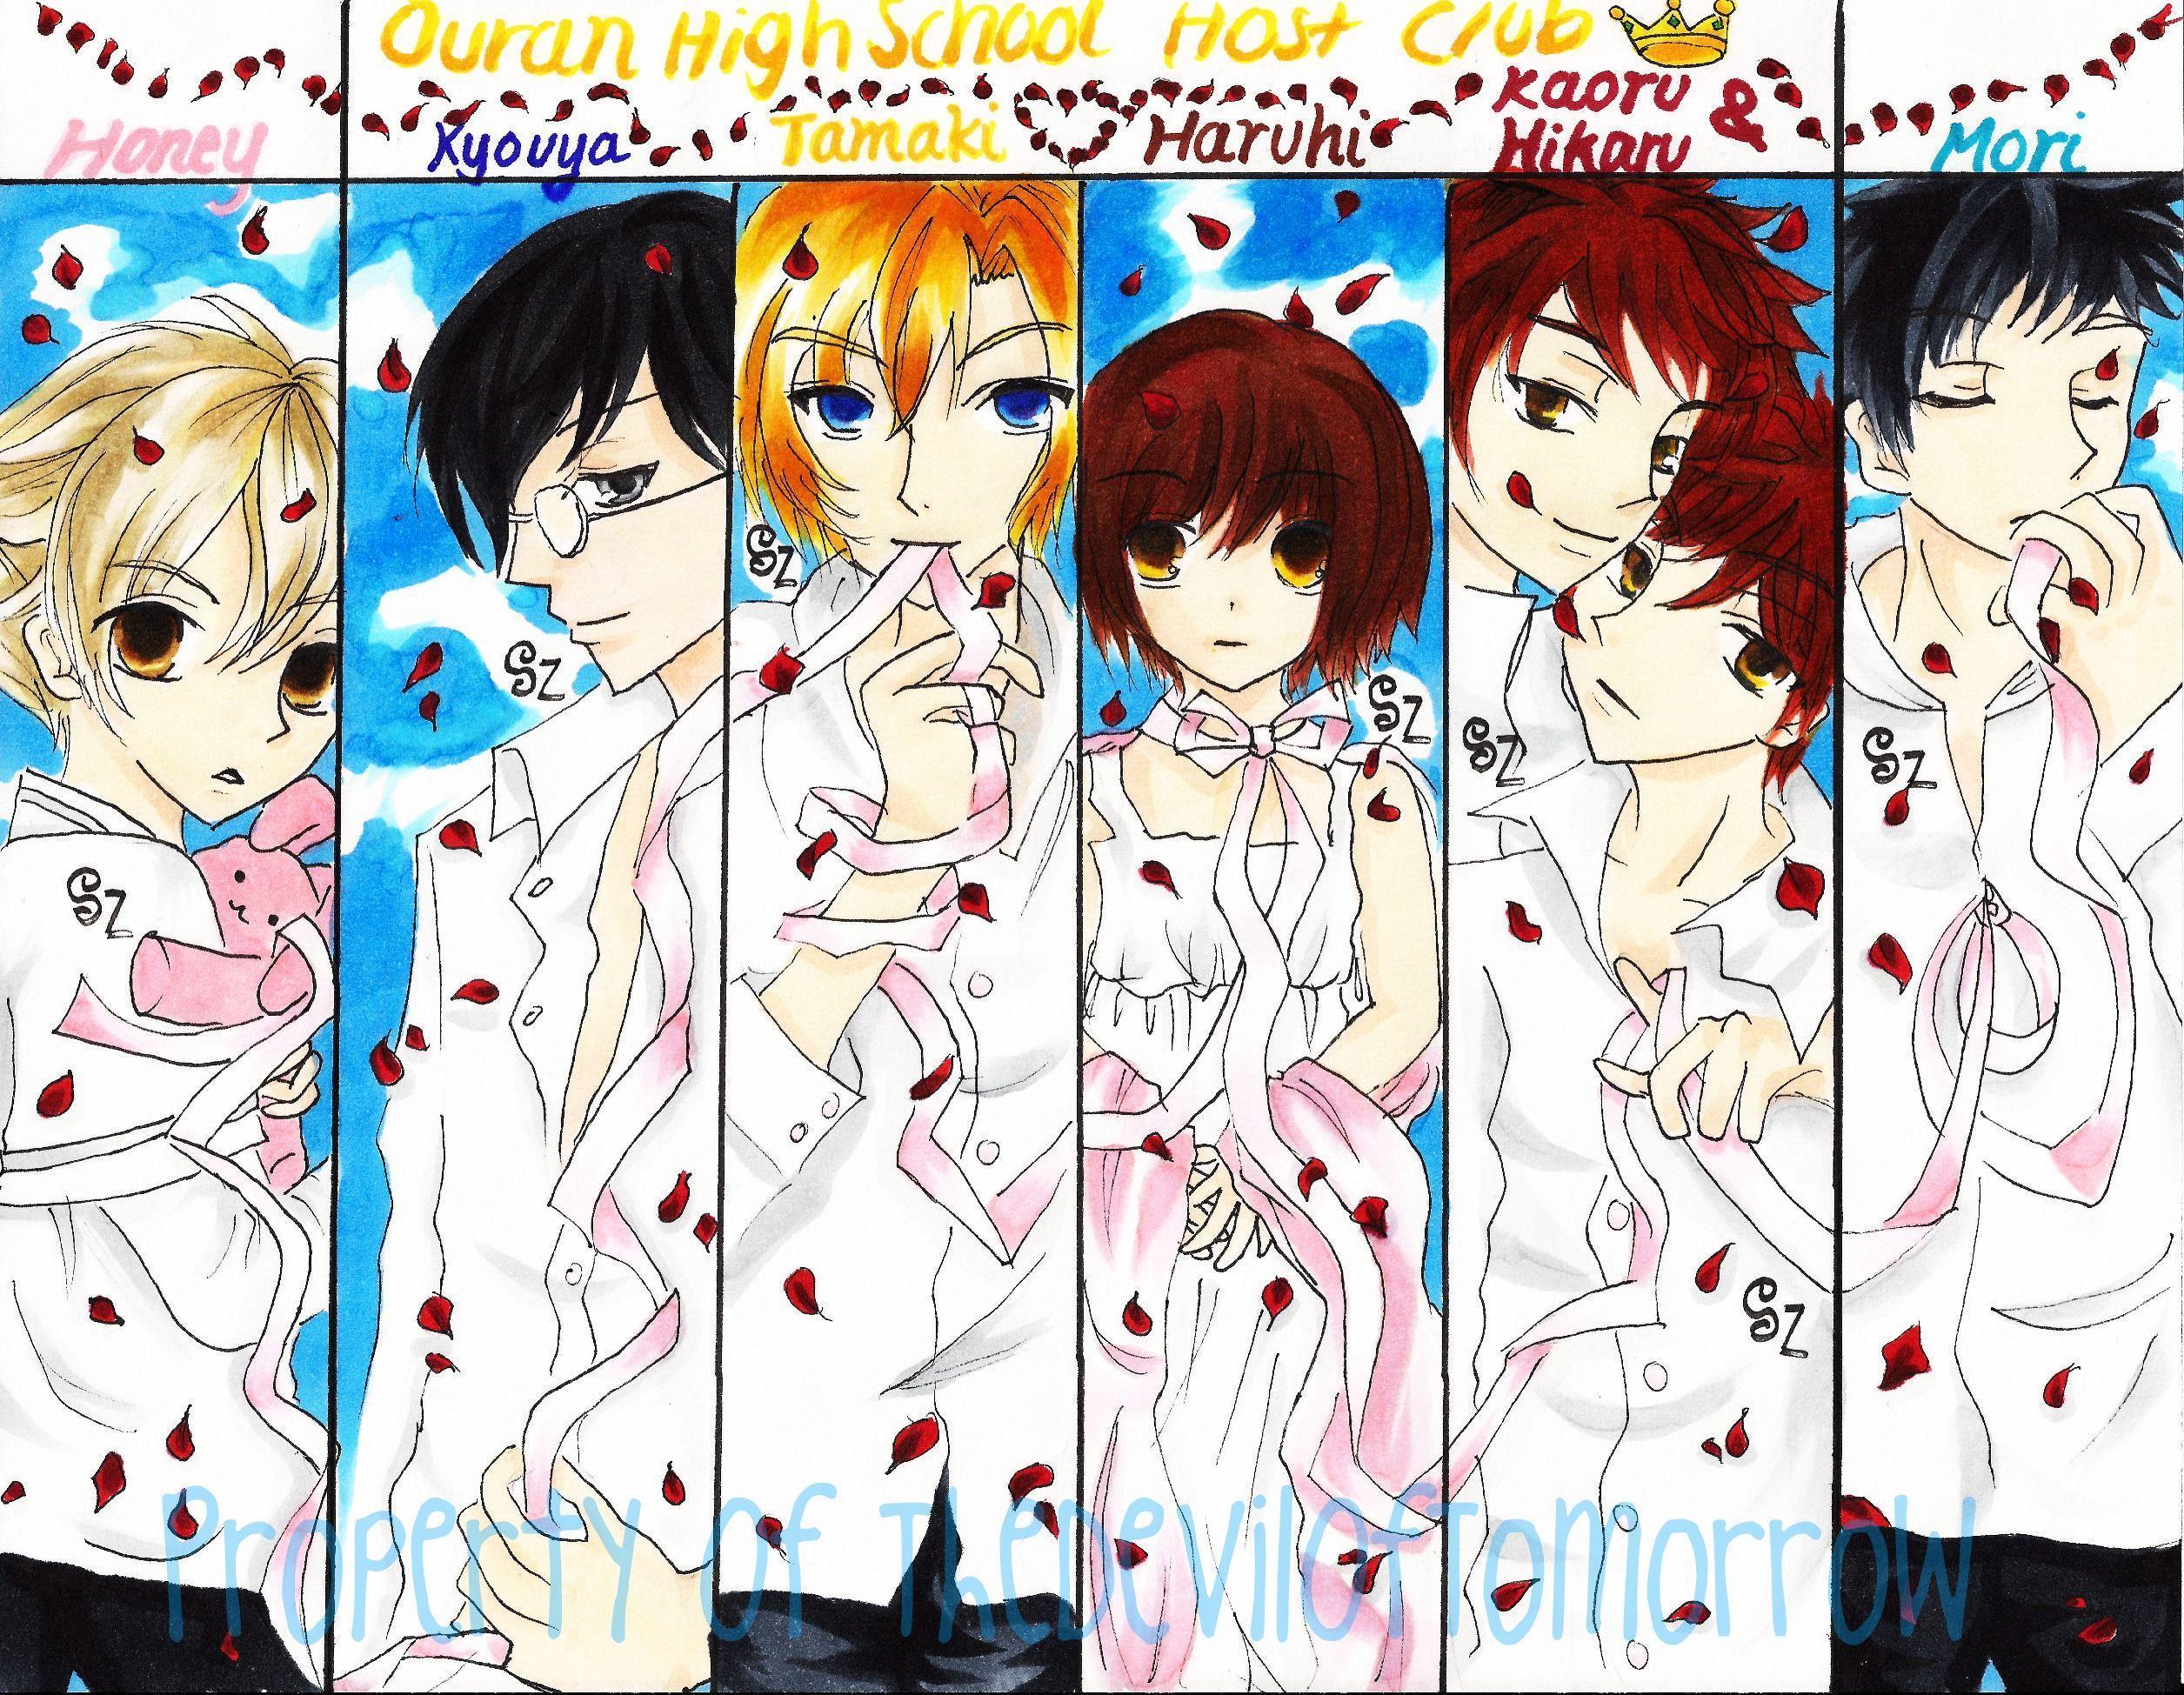 Ouran high school host club wallpapers.